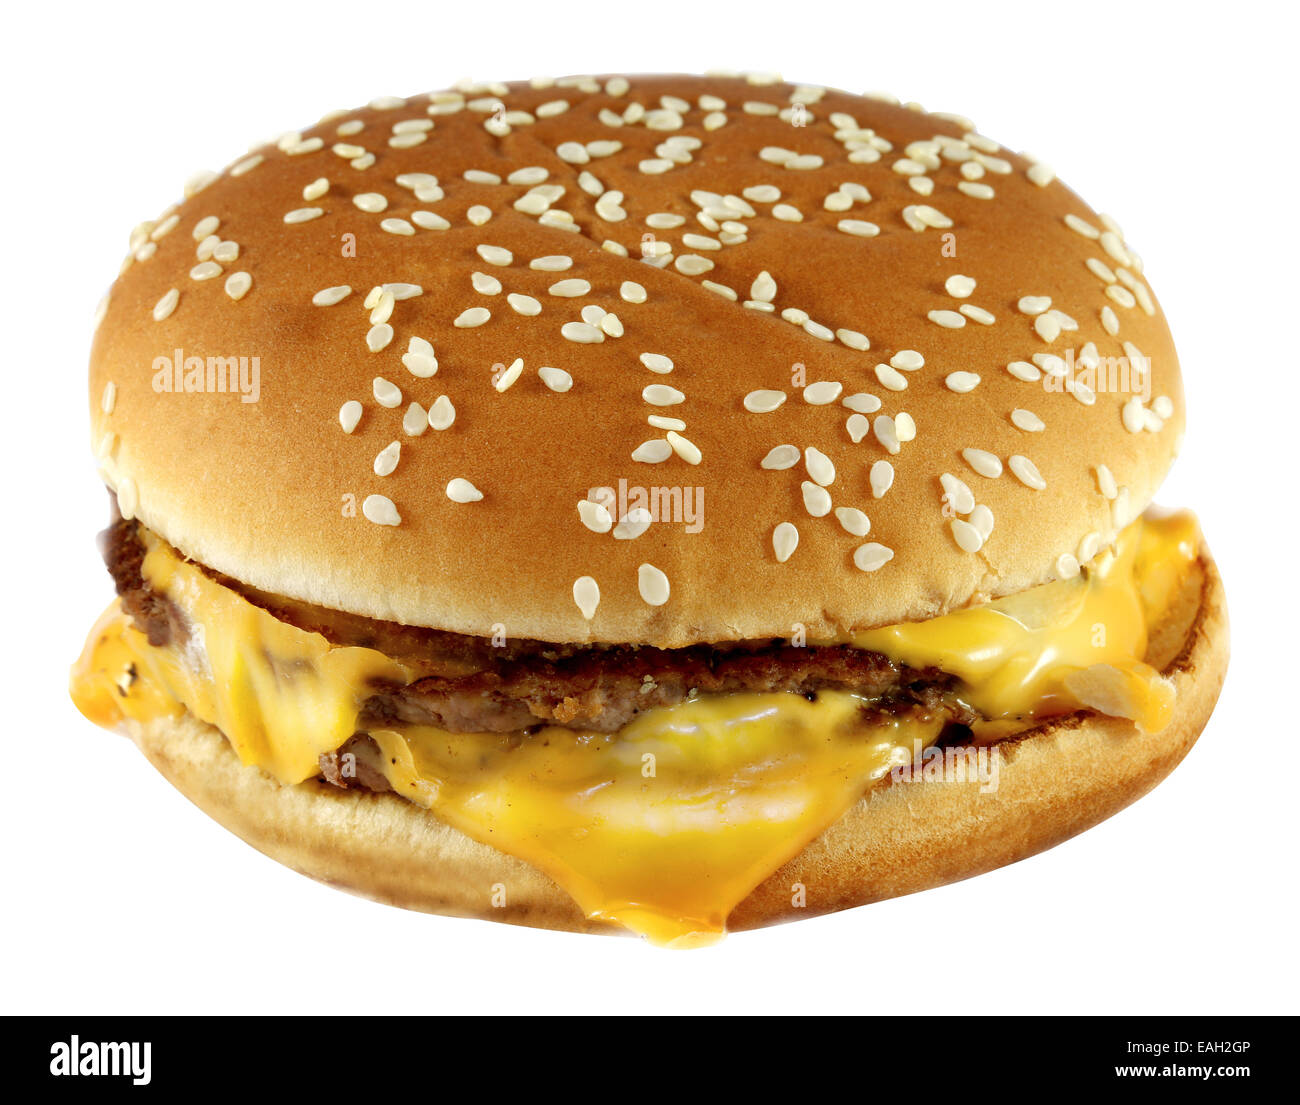 double cheeseburger is photographed close-up on white background Stock Photo